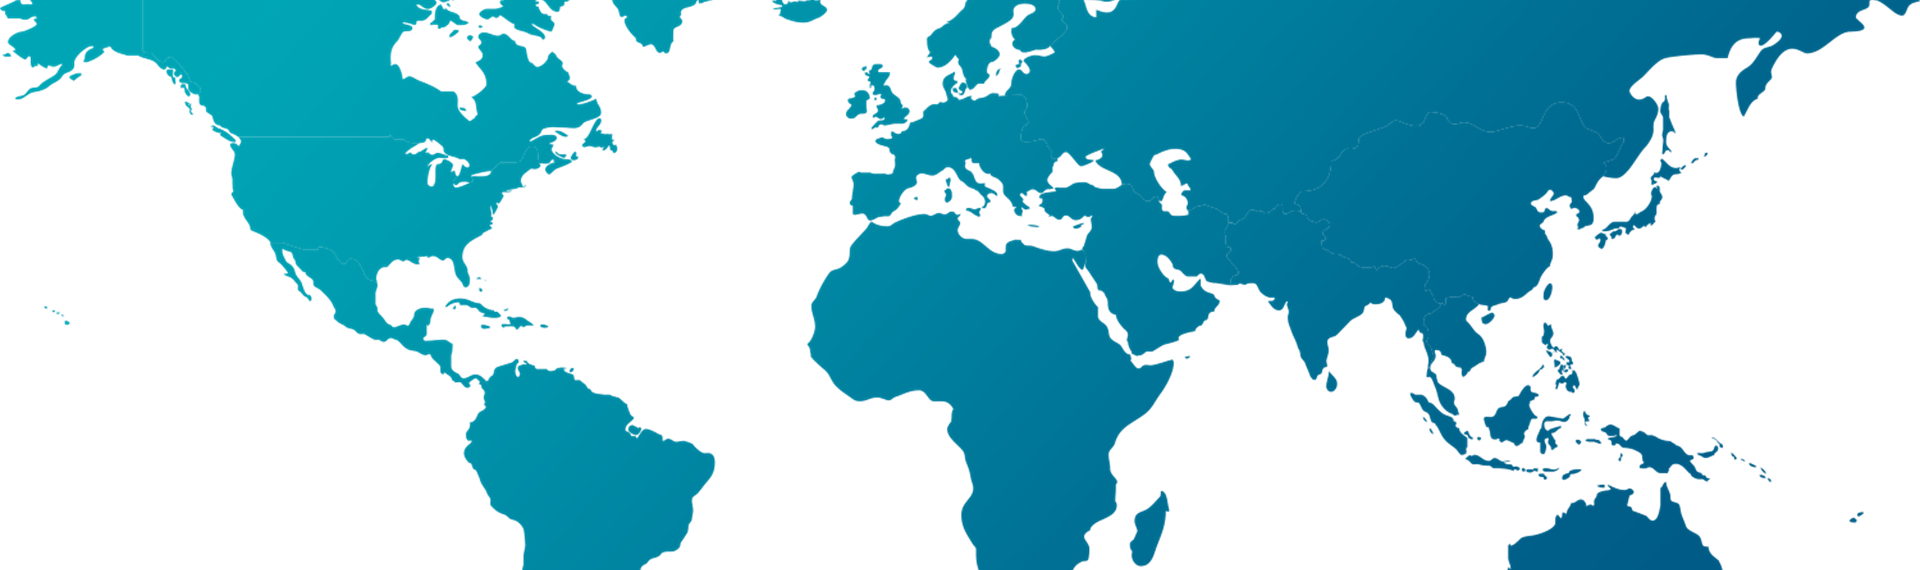 world_map_blue.png